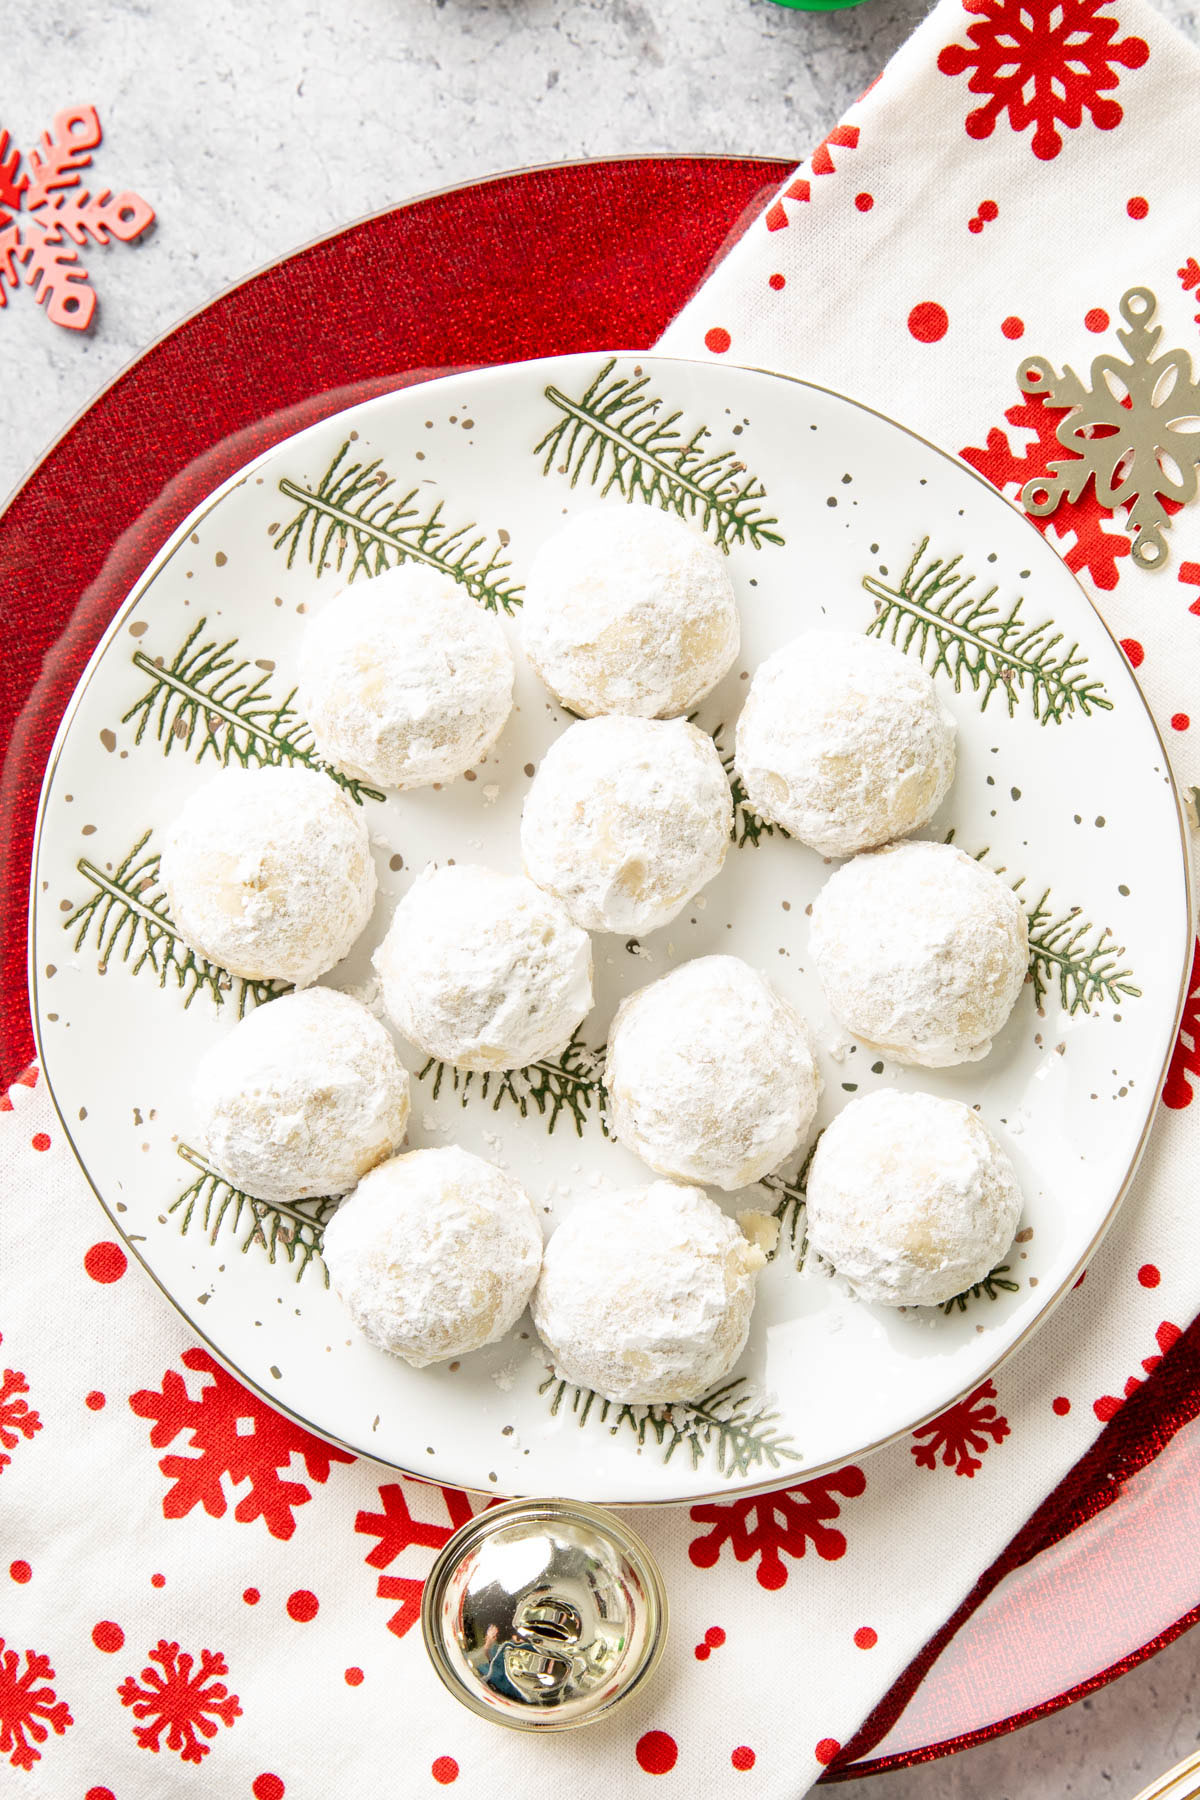 Christmas treats on a tree-lined plate with ornaments and snowflakes